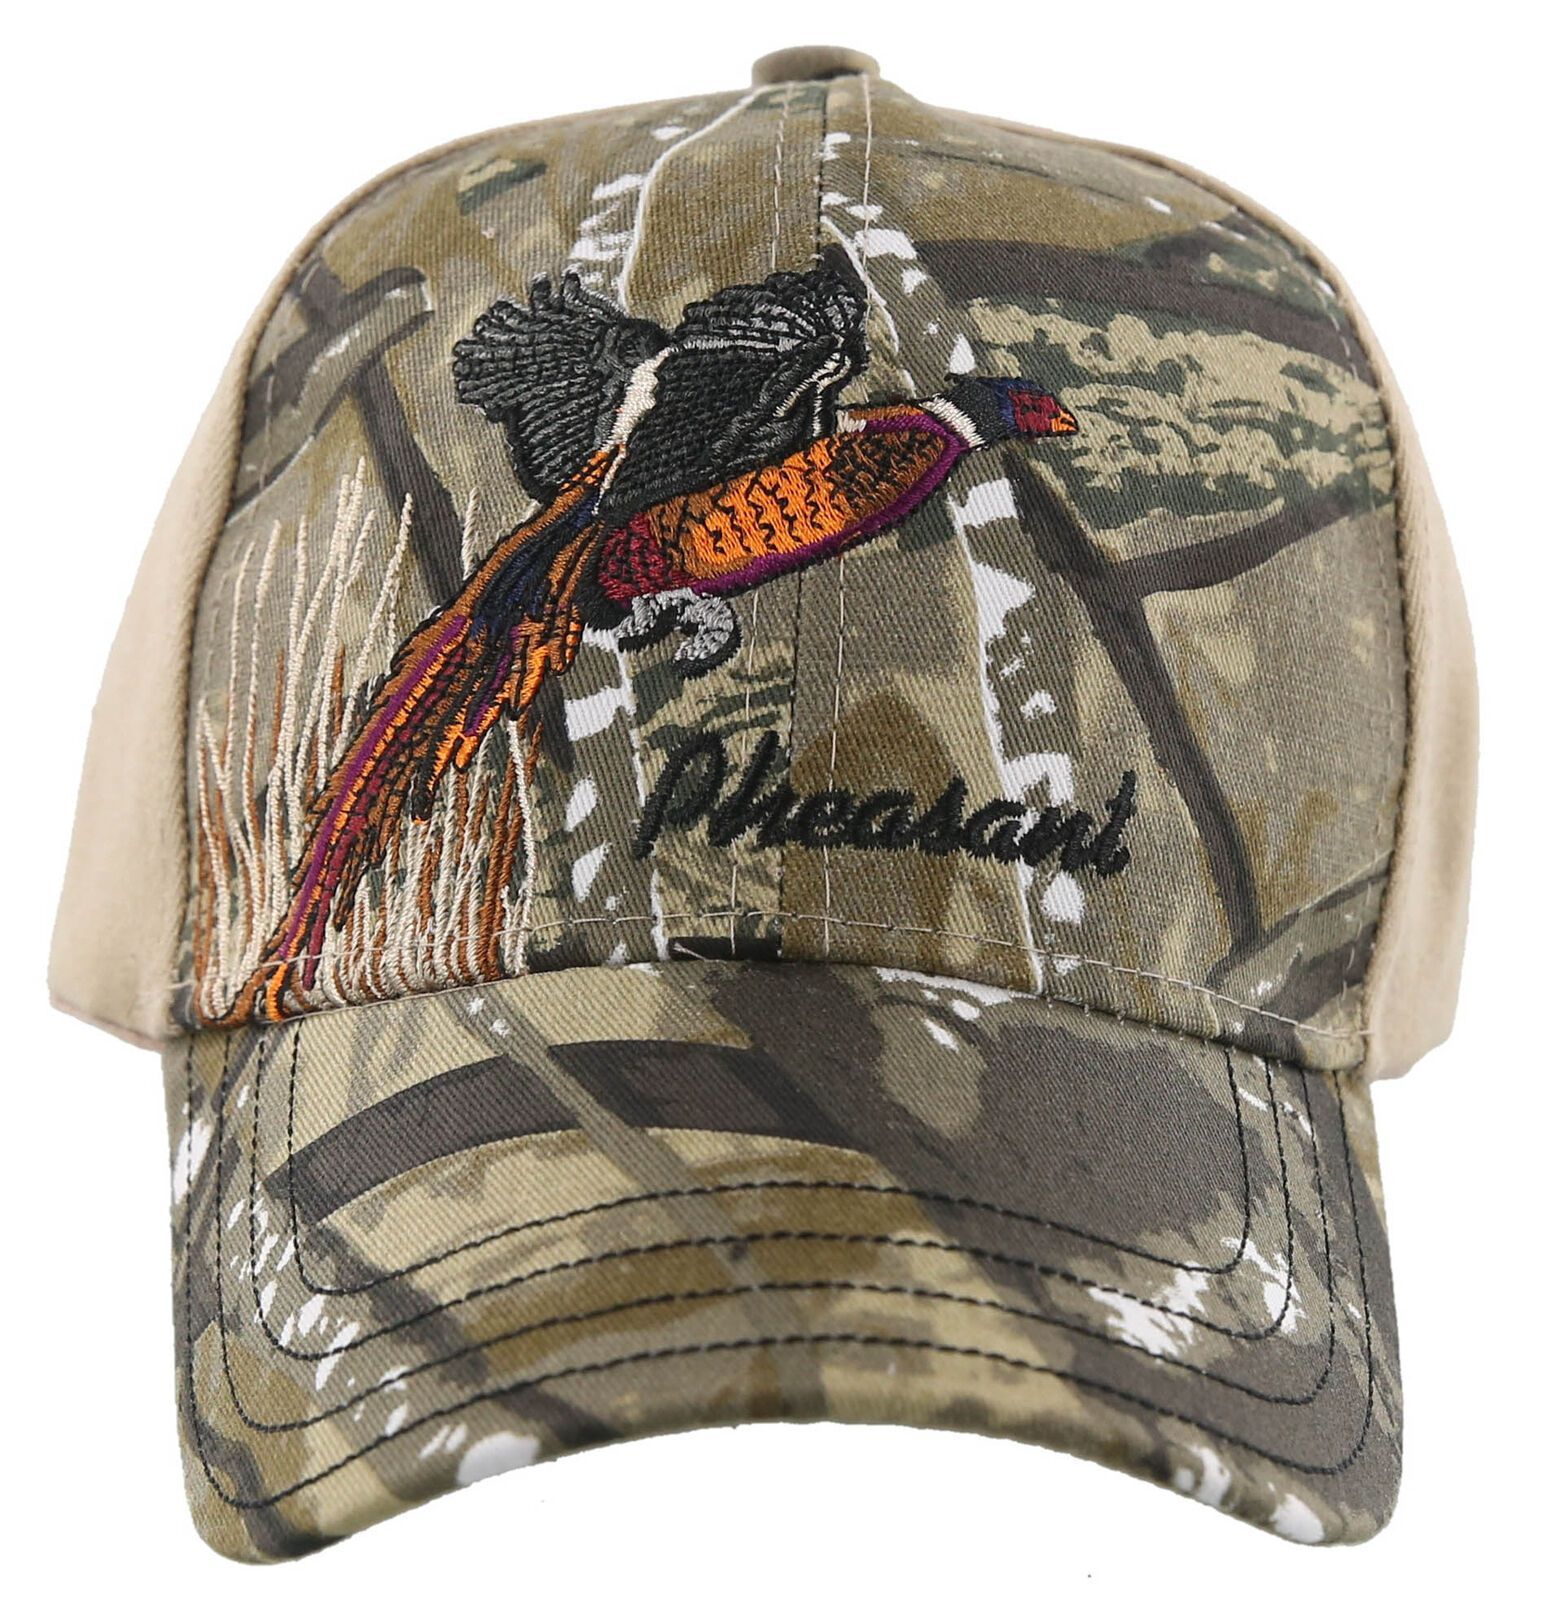 NEW! PHEASANT OUTDOOR HUNTING SIDE BALL CAP HAT CAMO - Men's Hats